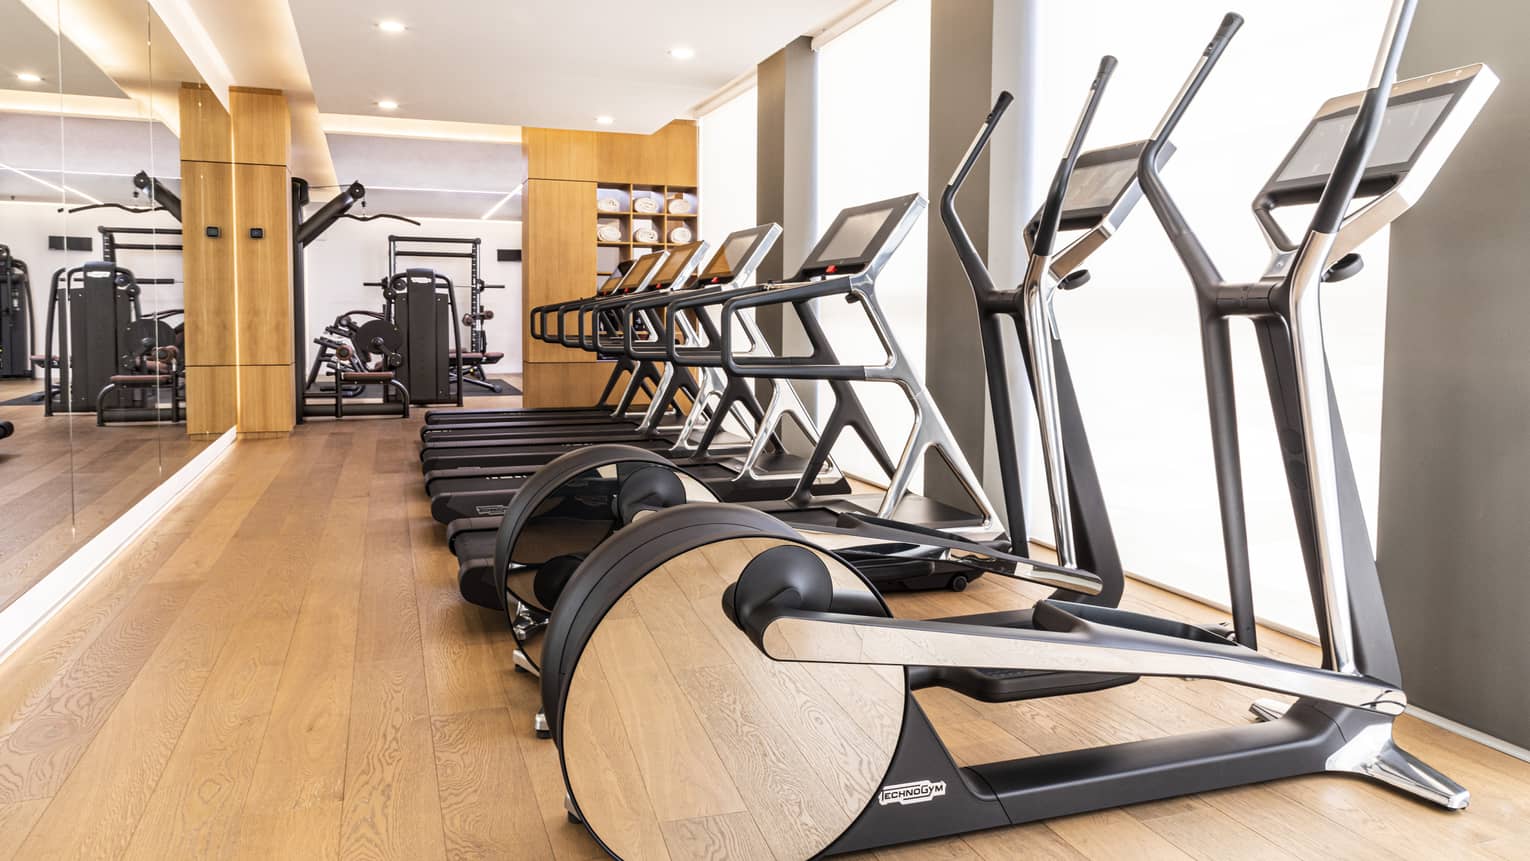 Indoor gym with a row of treadmills and elliptical machines facing windows